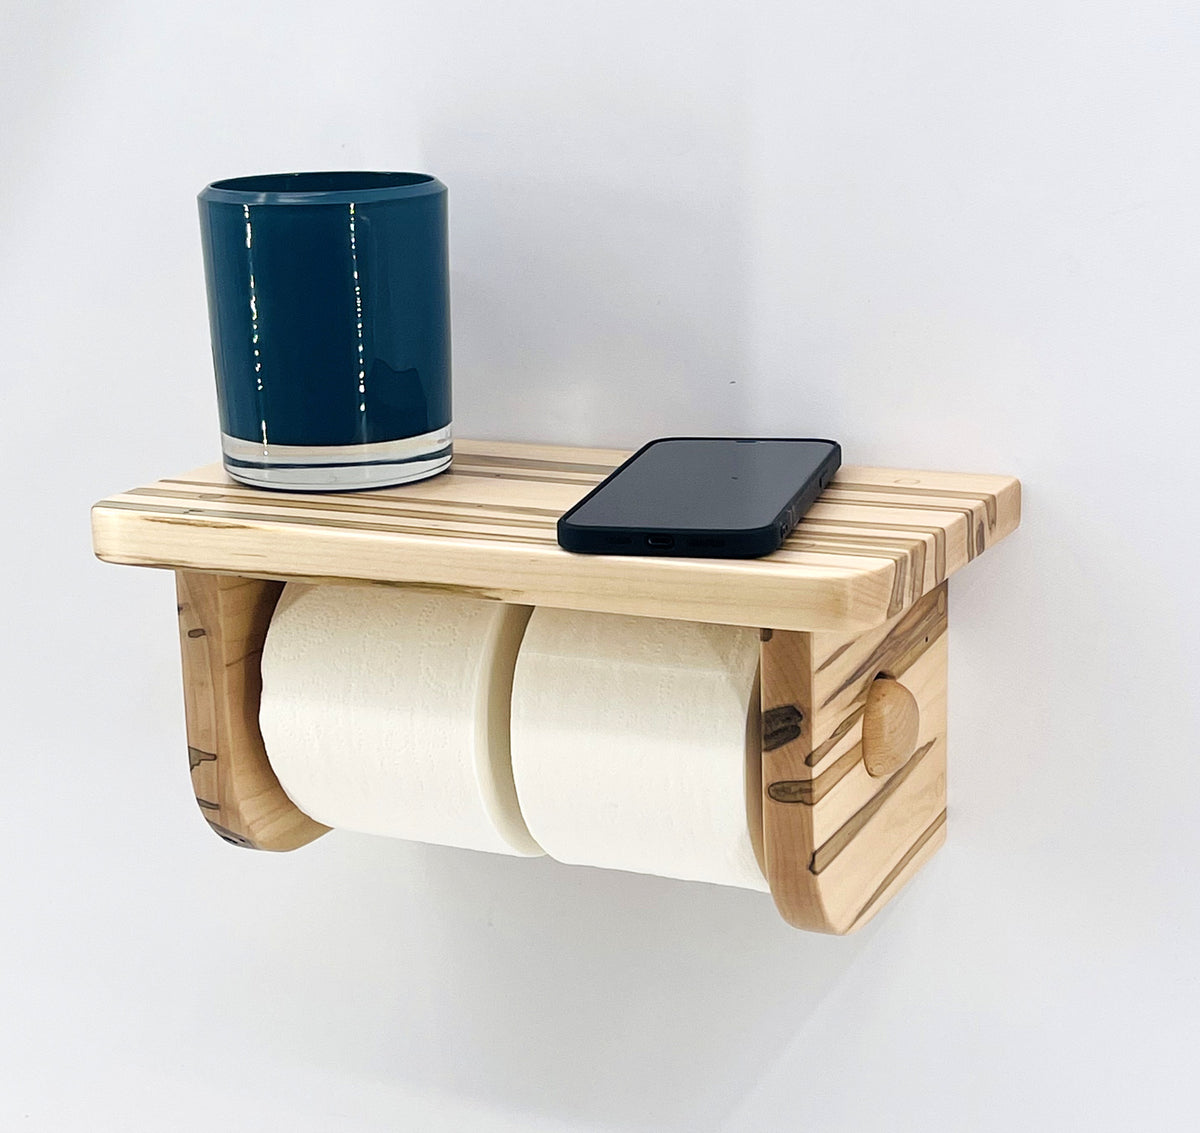 Diy Shelf Made From Small Wooden Box With Chain Toilet Roll Holder Below  Acrylic Print by A. Kapischke & I. Liebmann - Pixels